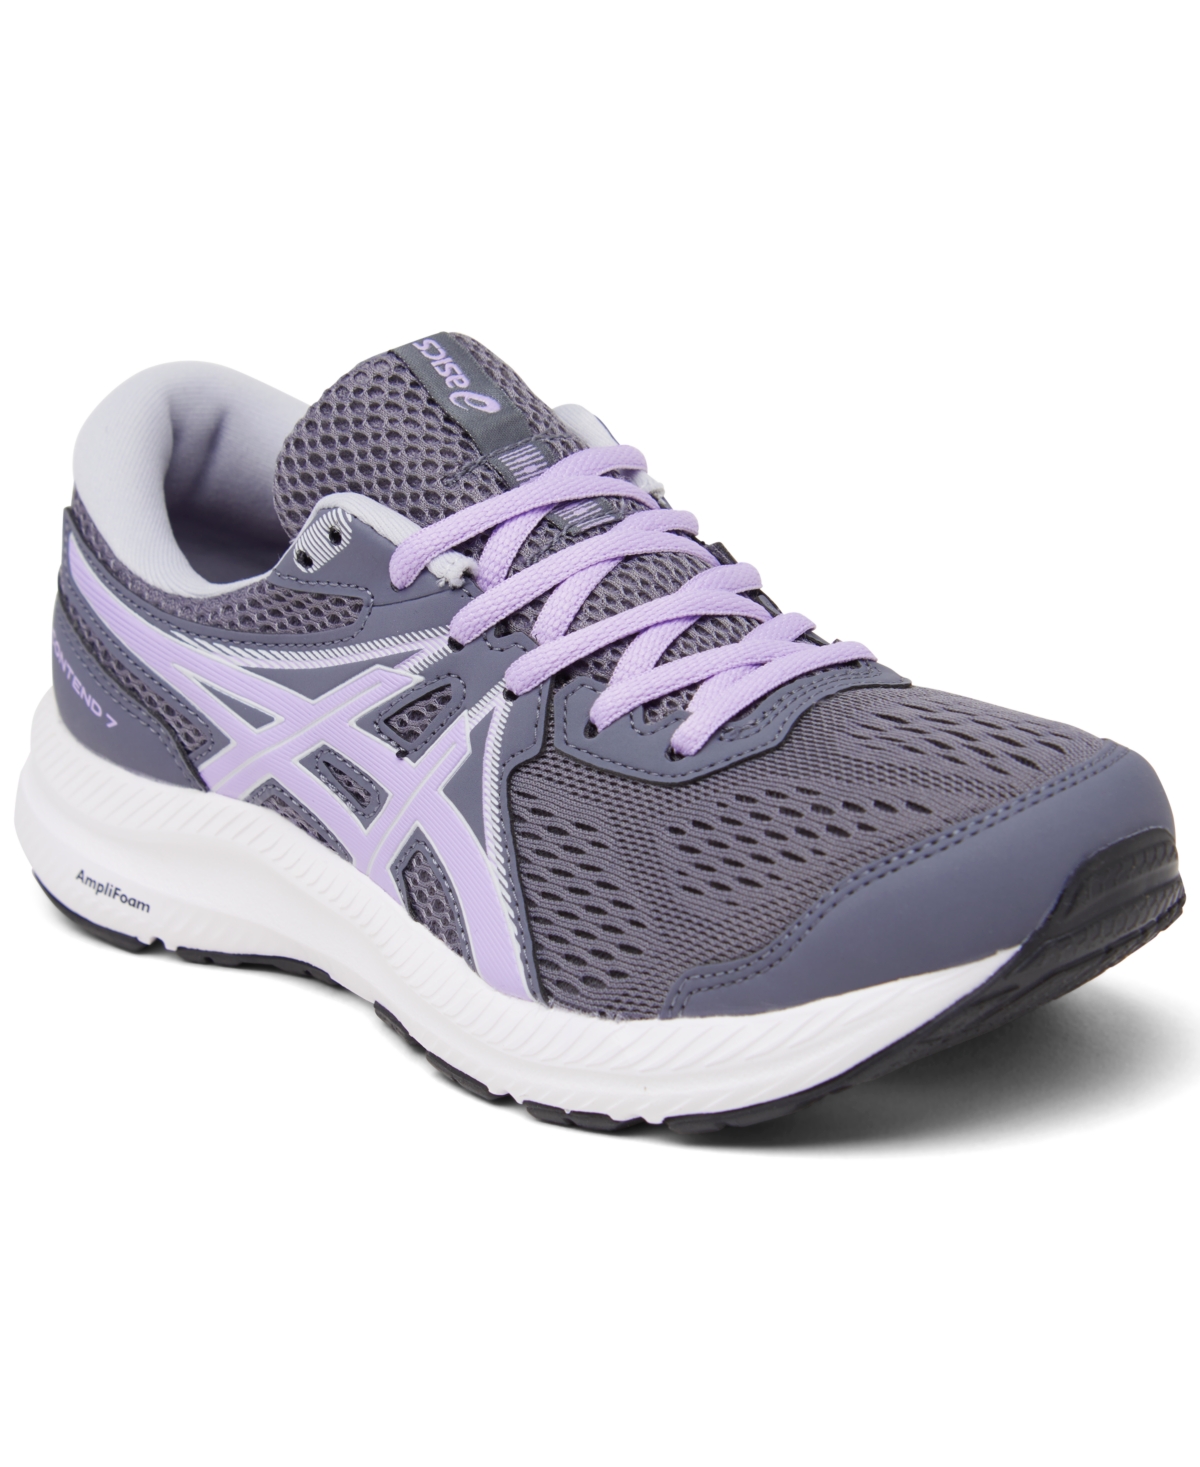 ASICS WOMEN'S GEL-CONTEND 7 RUNNING SNEAKERS FROM FINISH LINE